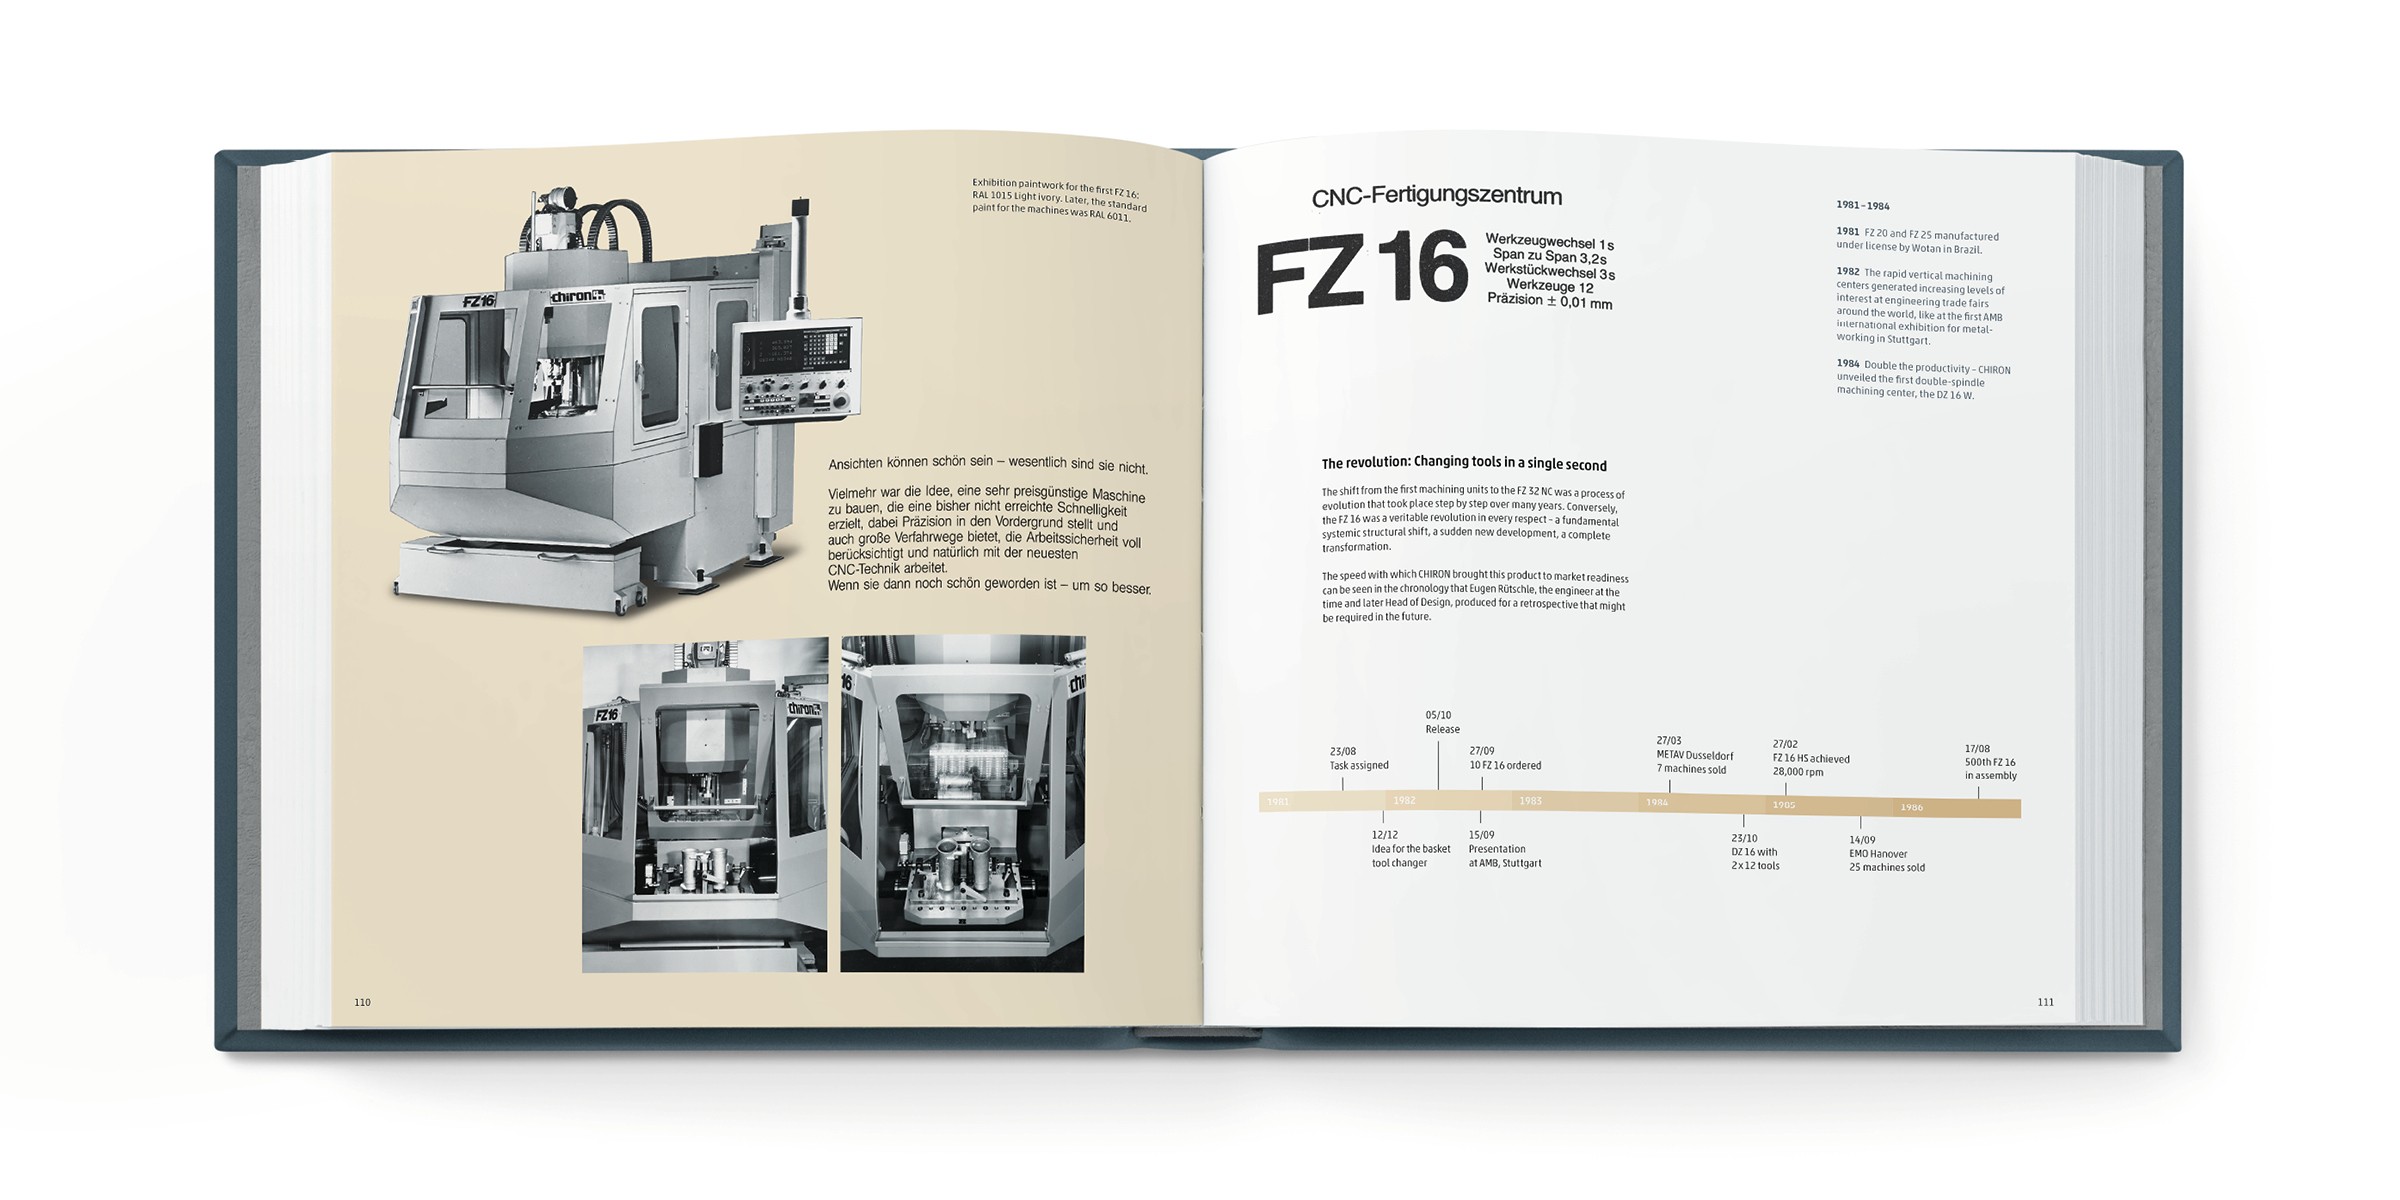 Revolution in the machine-tool industry: The legendary FZ 16 with tool change in 1 second spawns the tag-line »Seconds ahead«.